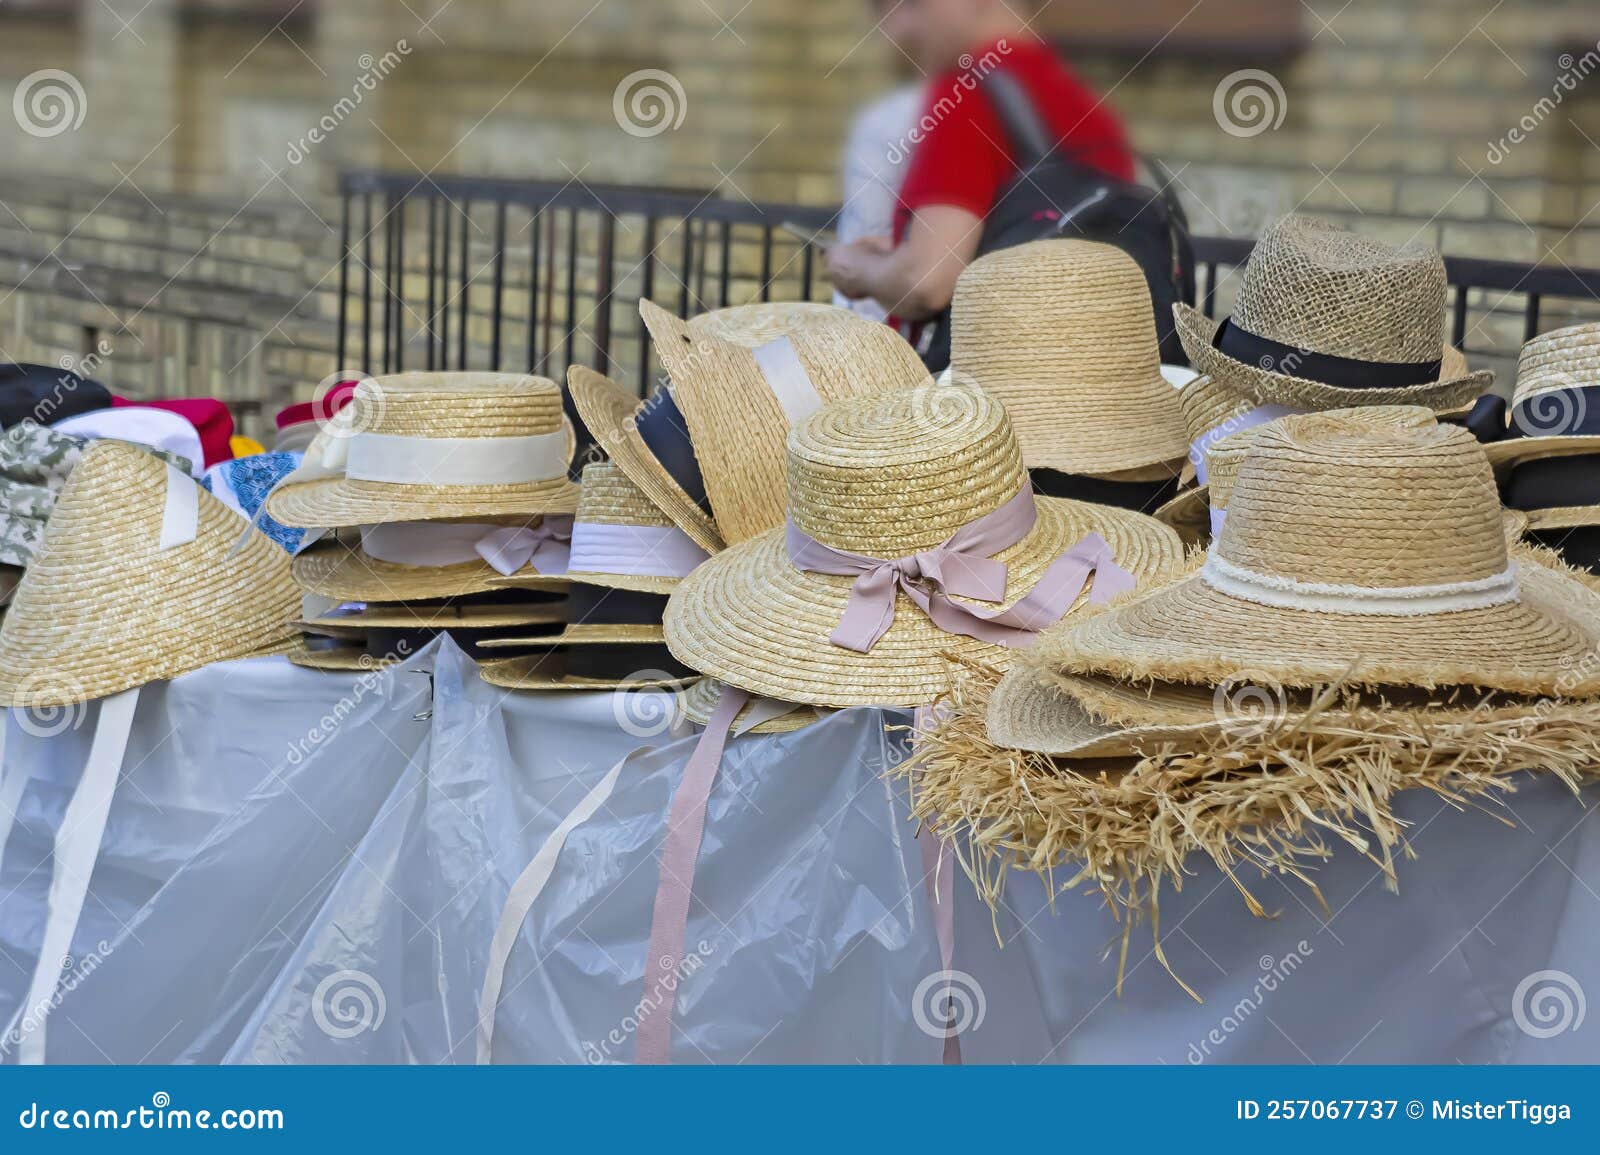 market stall with straw hats. big group of authentic panama hats or paja toquilla hats made from straw at craft market img